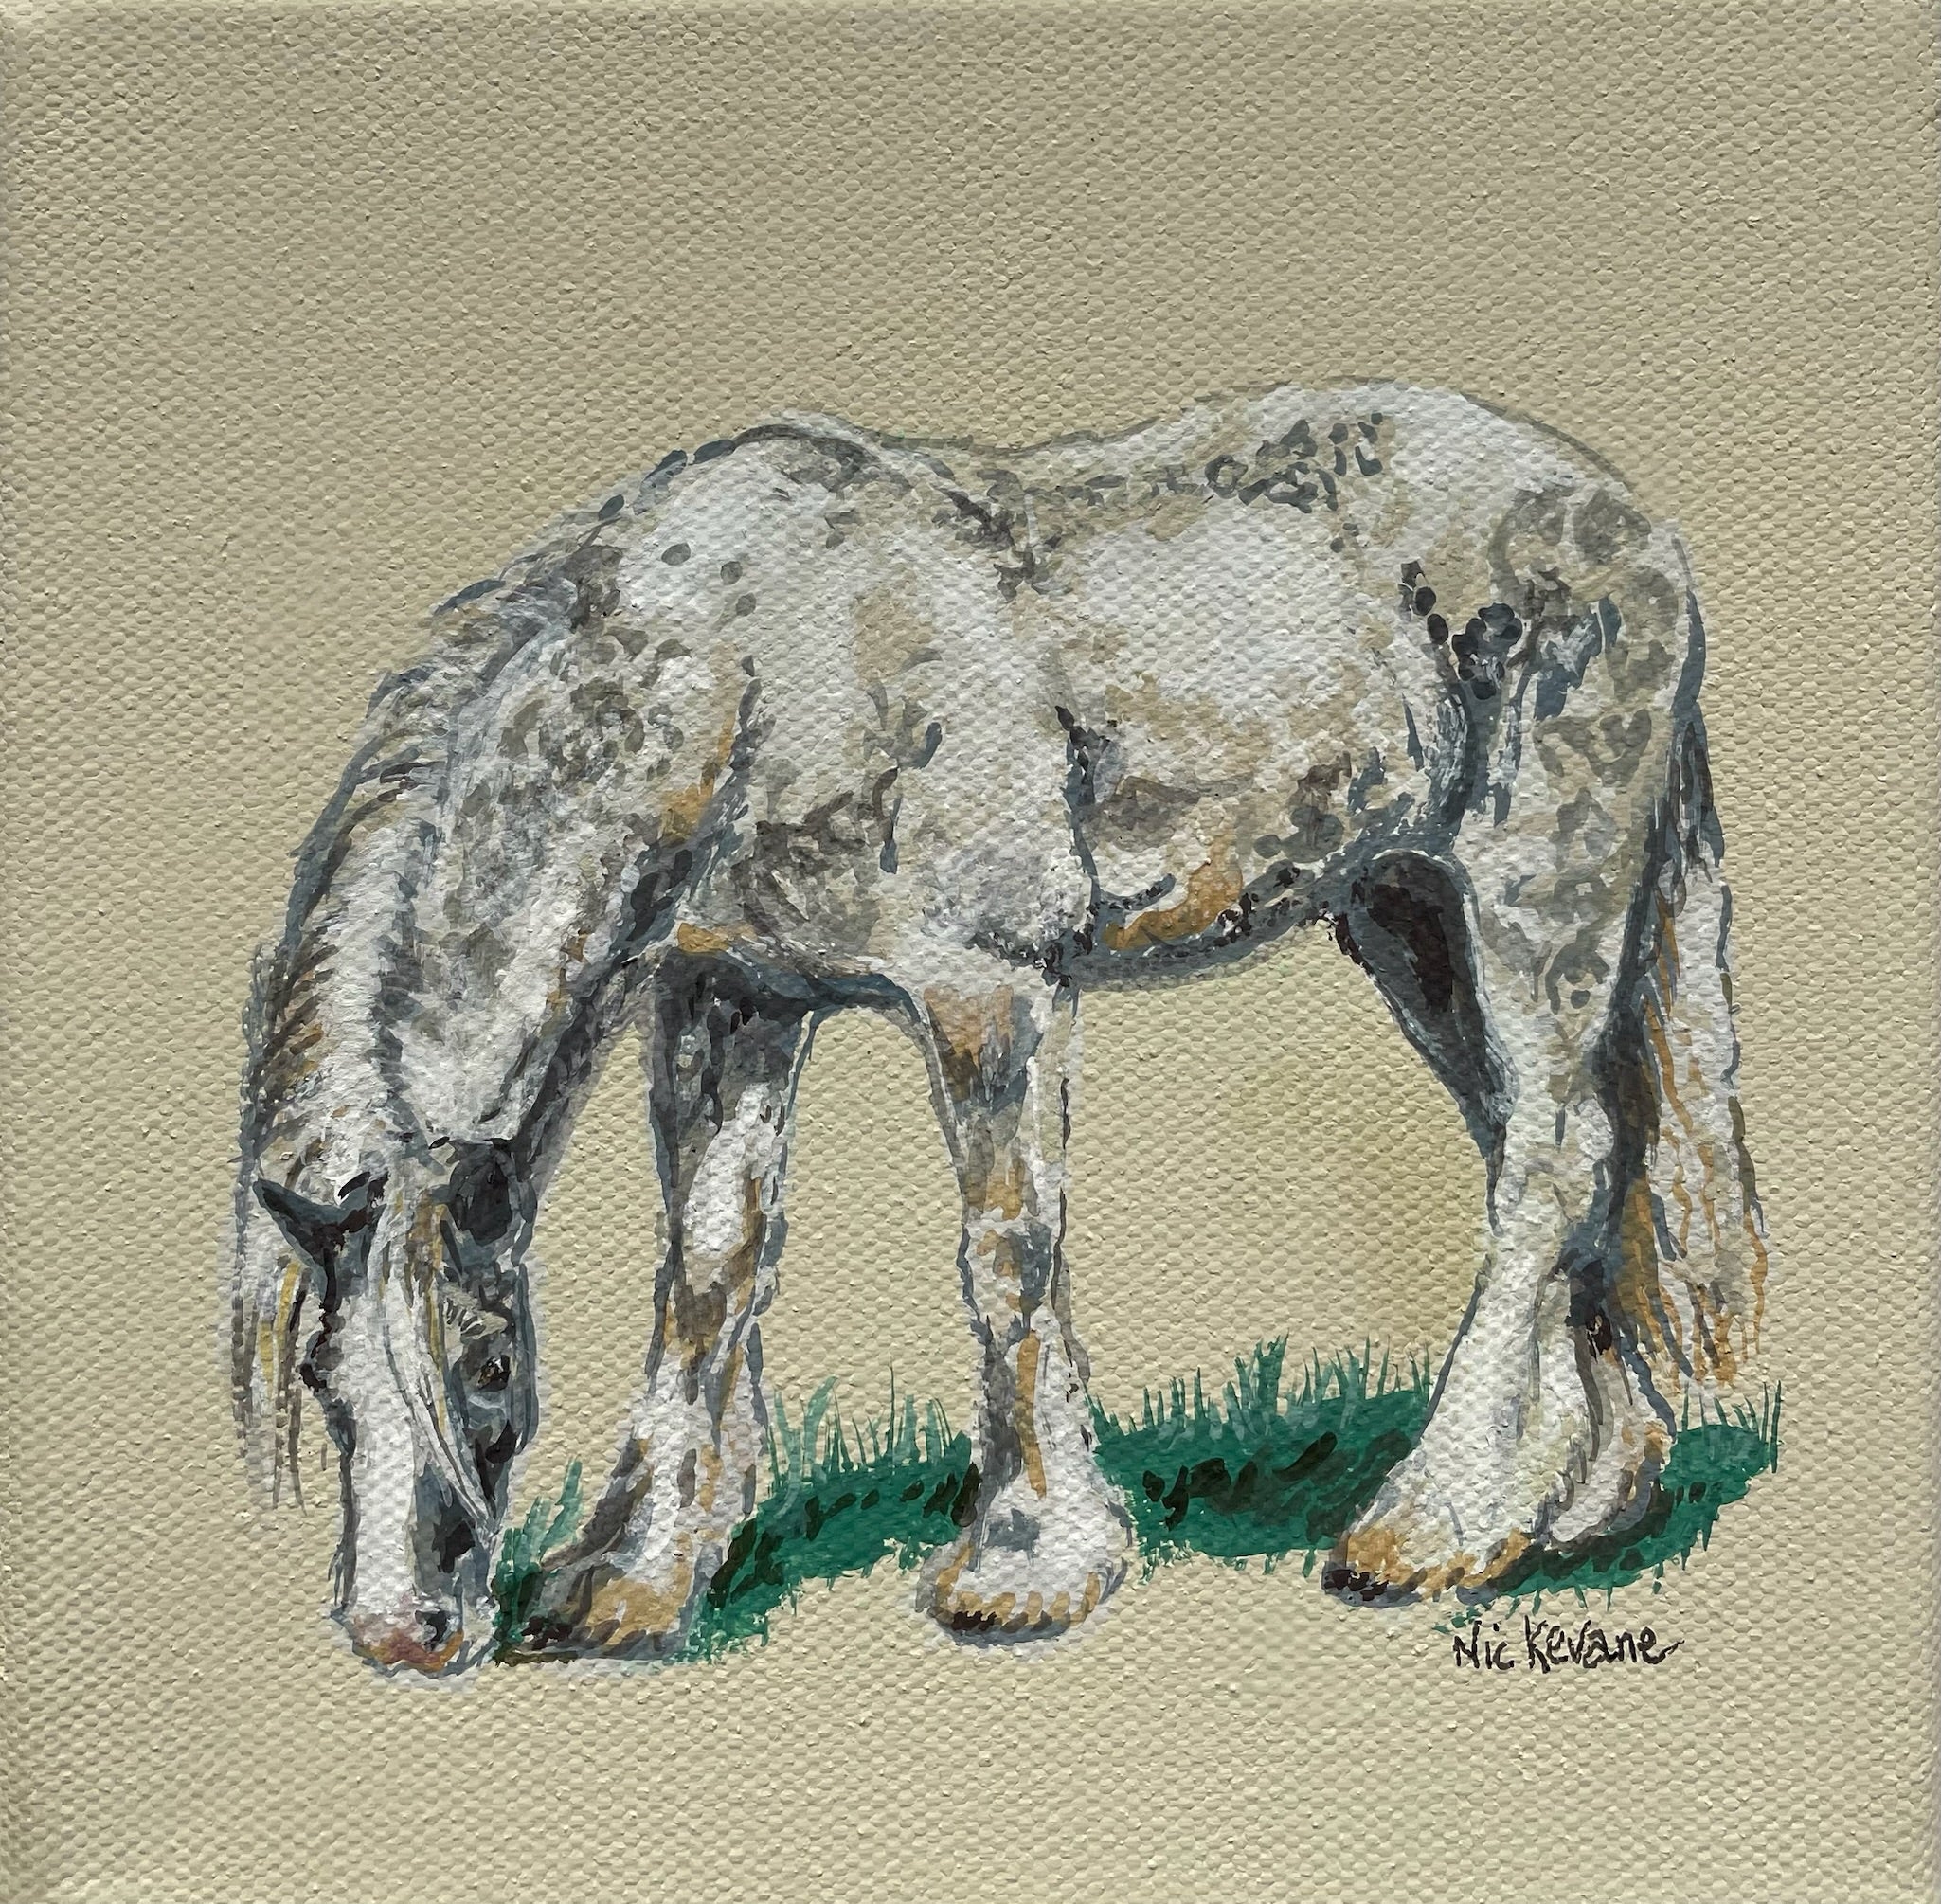 Dappled Grey Horse - 15cm x 15cm mini paintings depicting various countryside subjects.